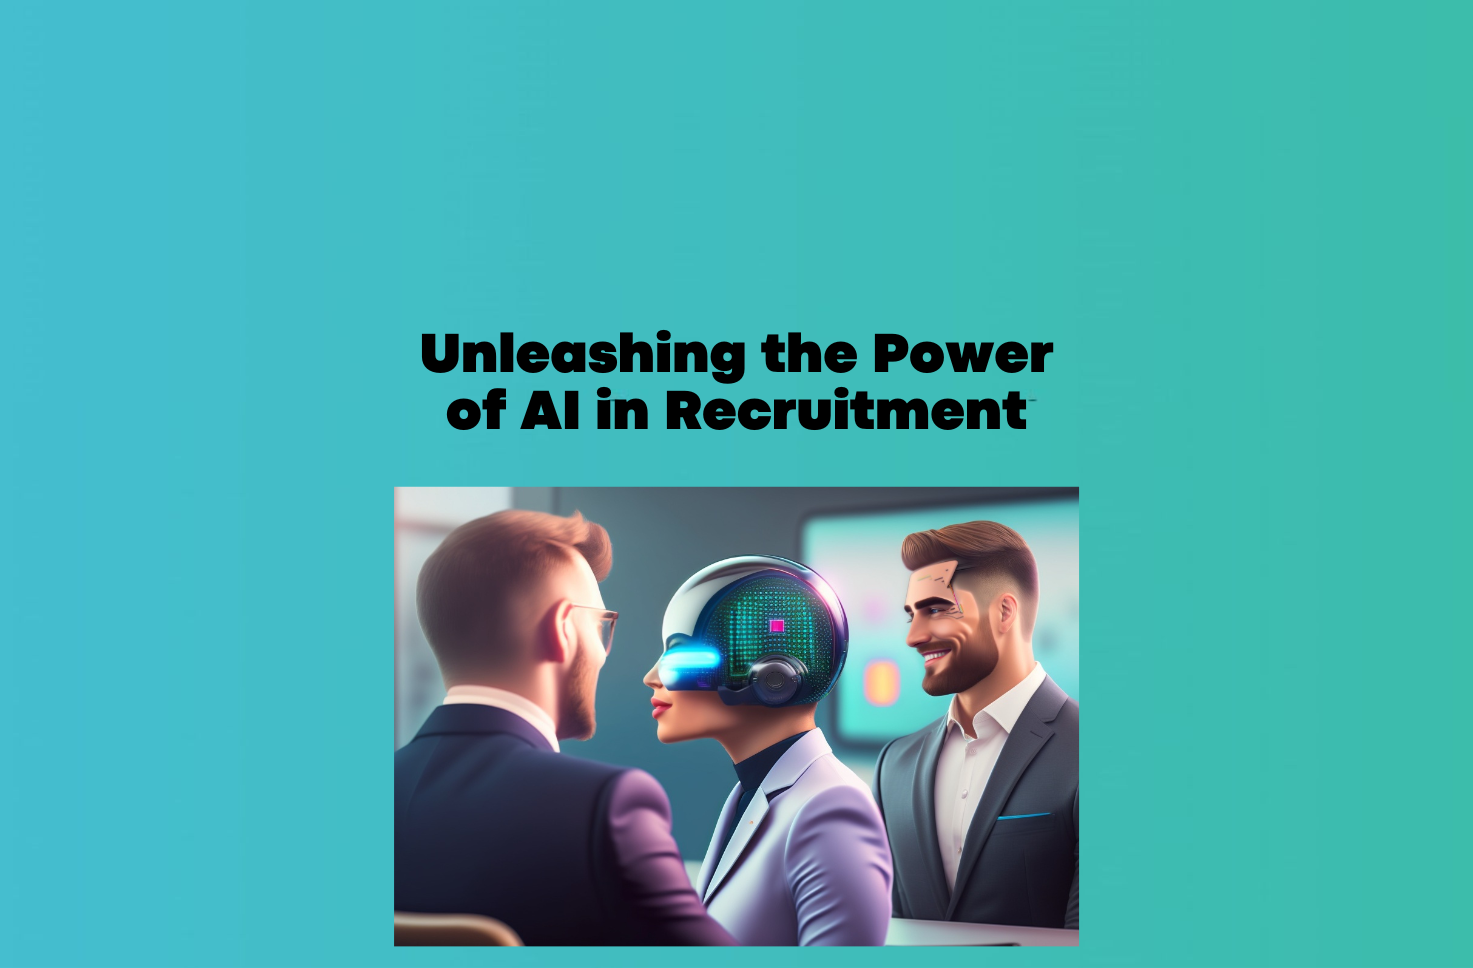 Unleashing the Power of AI in Recruitment